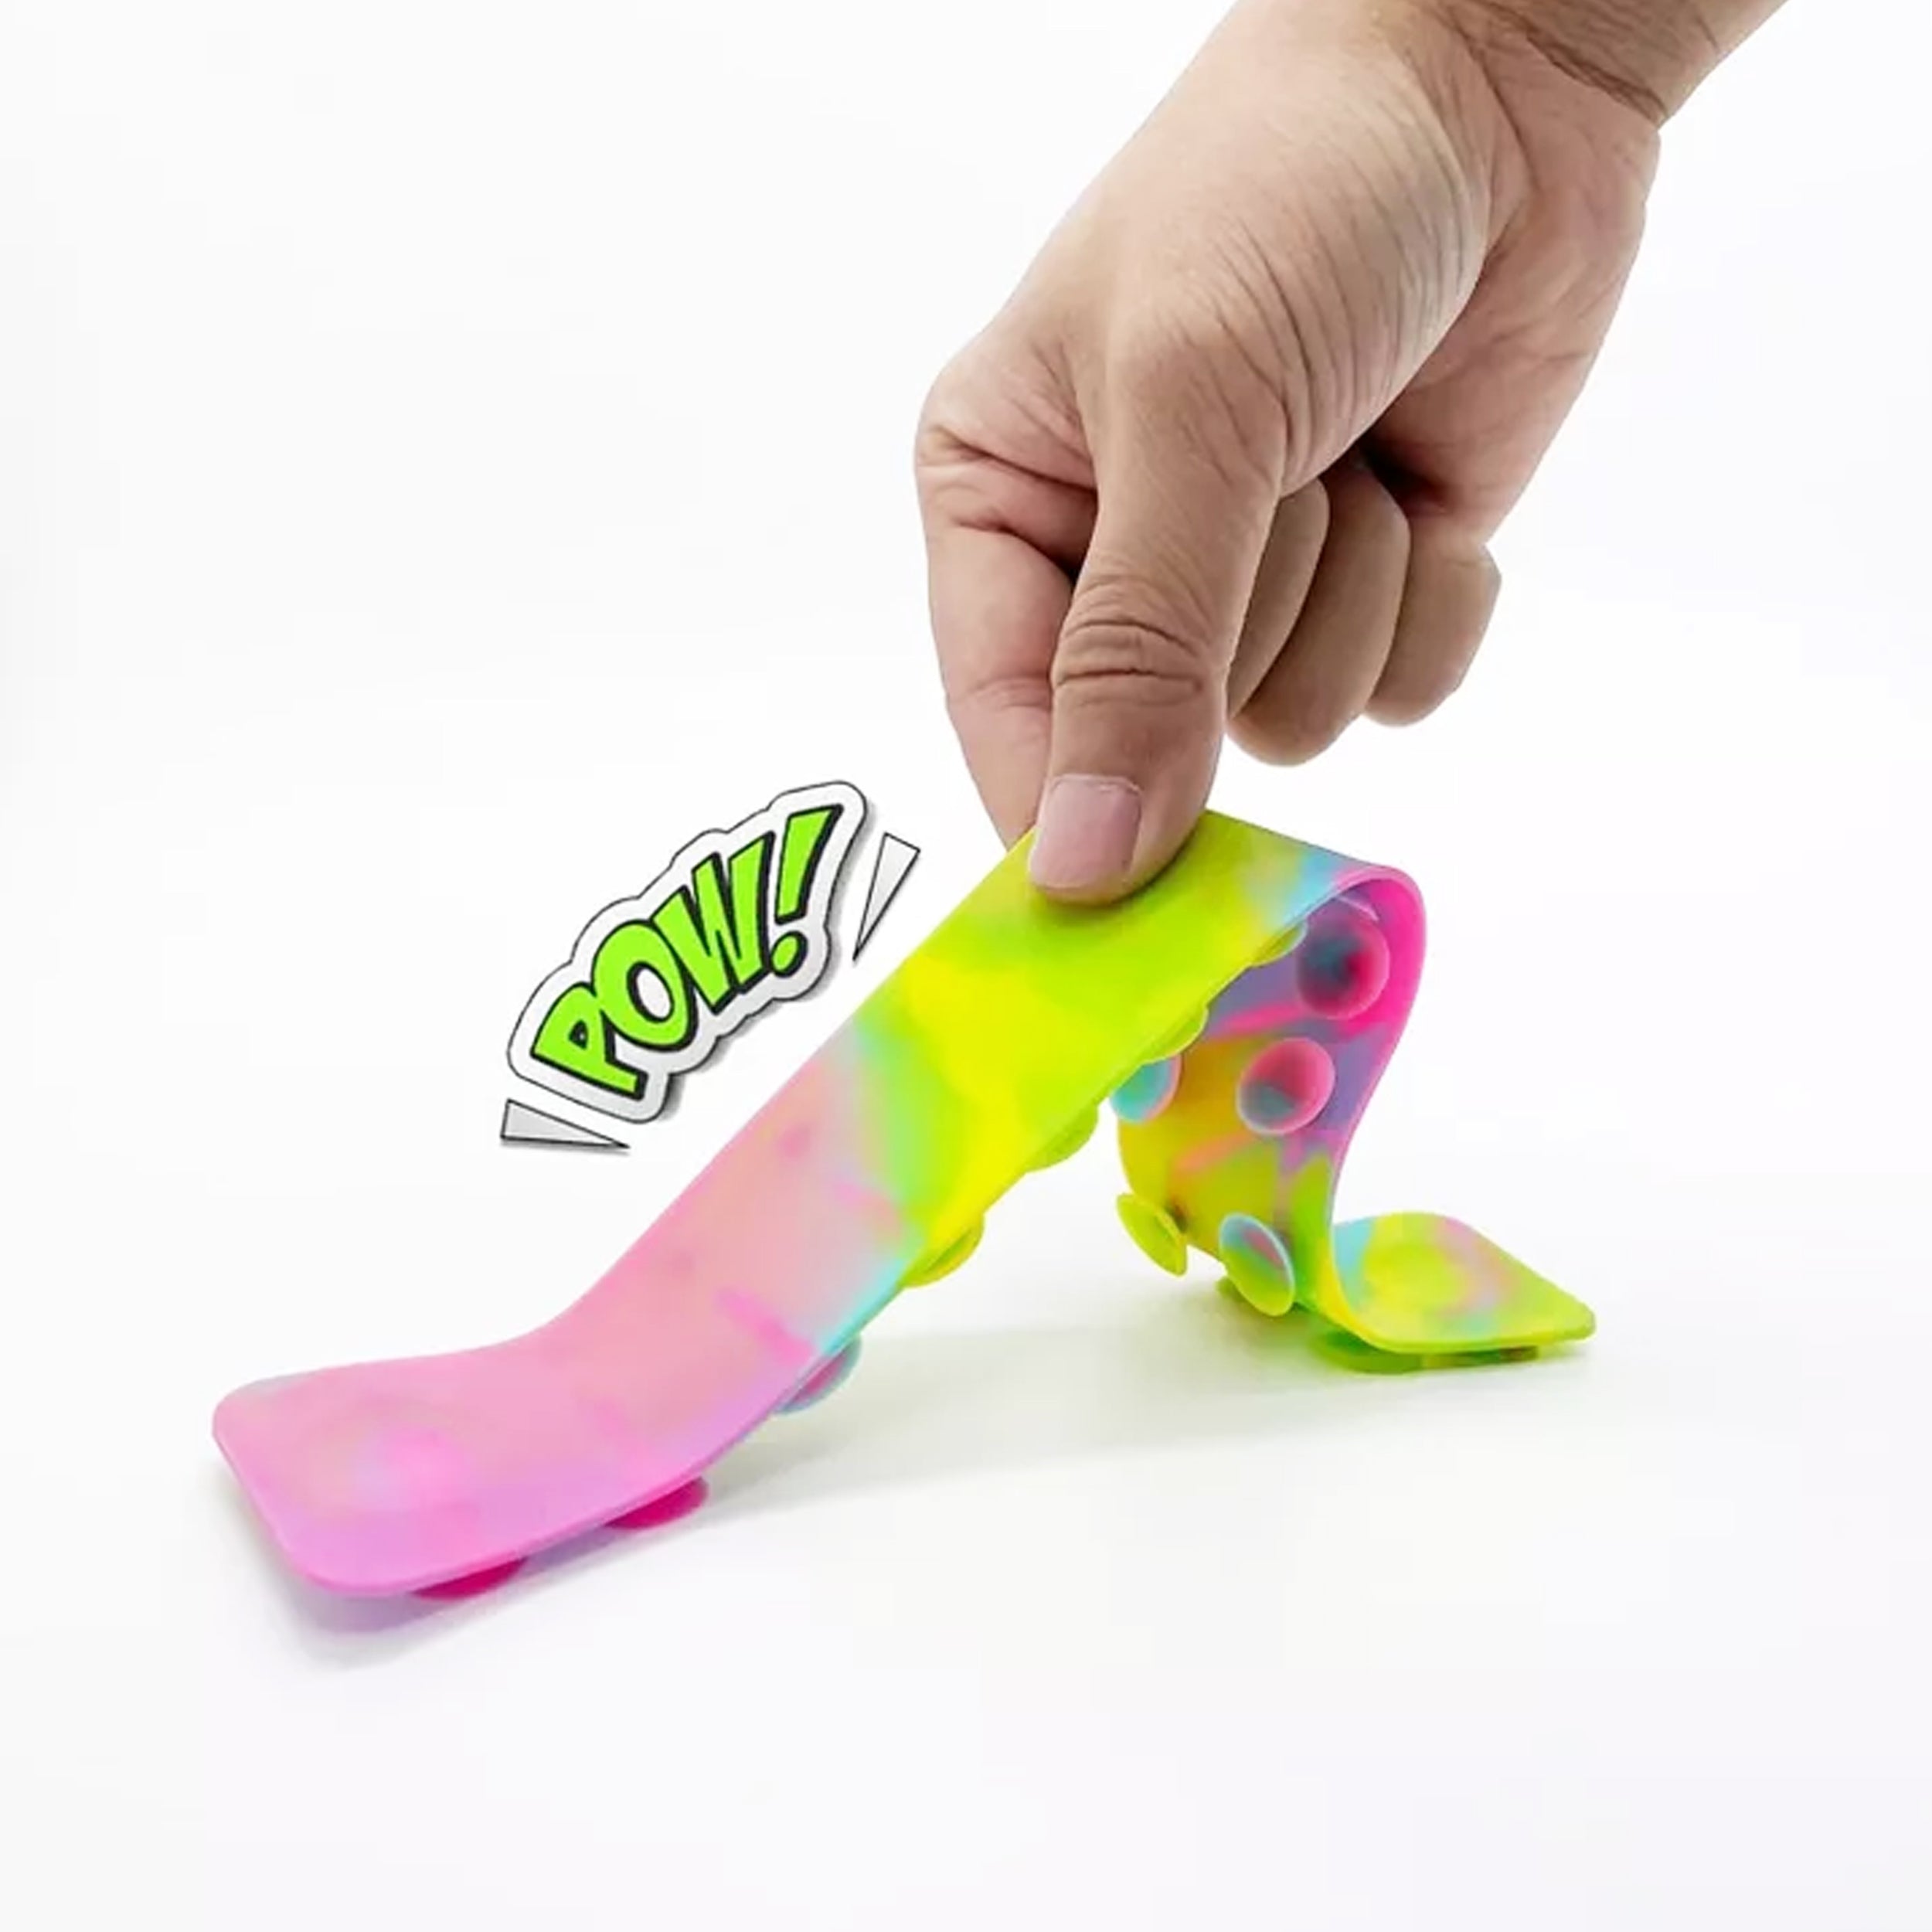 Play and Relax with the Pop Suction Cup Sucker Fidget Toy from JSBlueRidge Wholesale